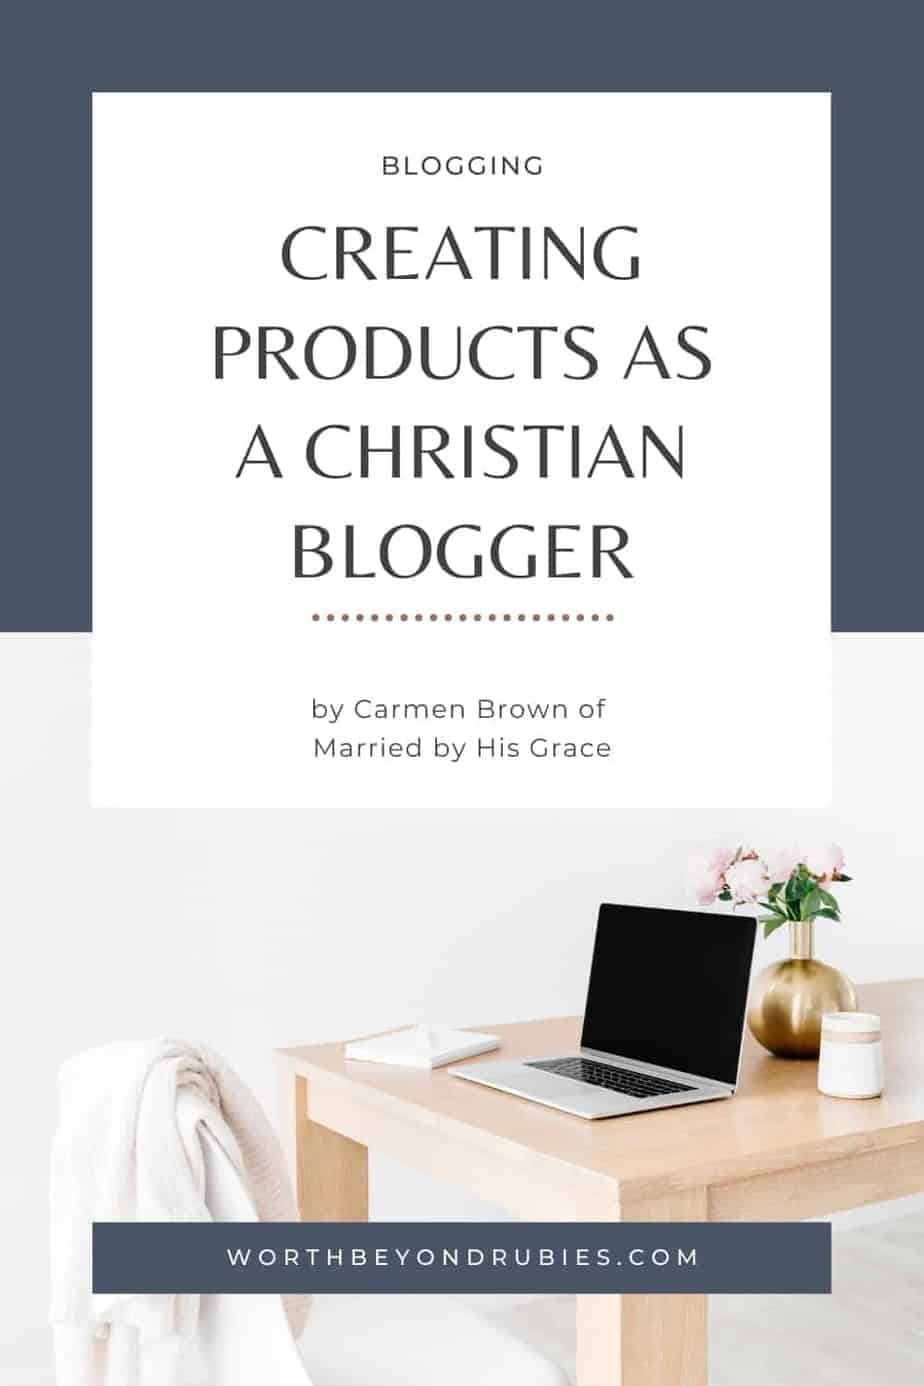 An image of a laptop on a wooden table with a plant behind it and a chair with a sweater tossed over the back in front of the table and a text overlay that says Creating Products as a Christian Blogger - by Carmen Brown of Married by His Grace